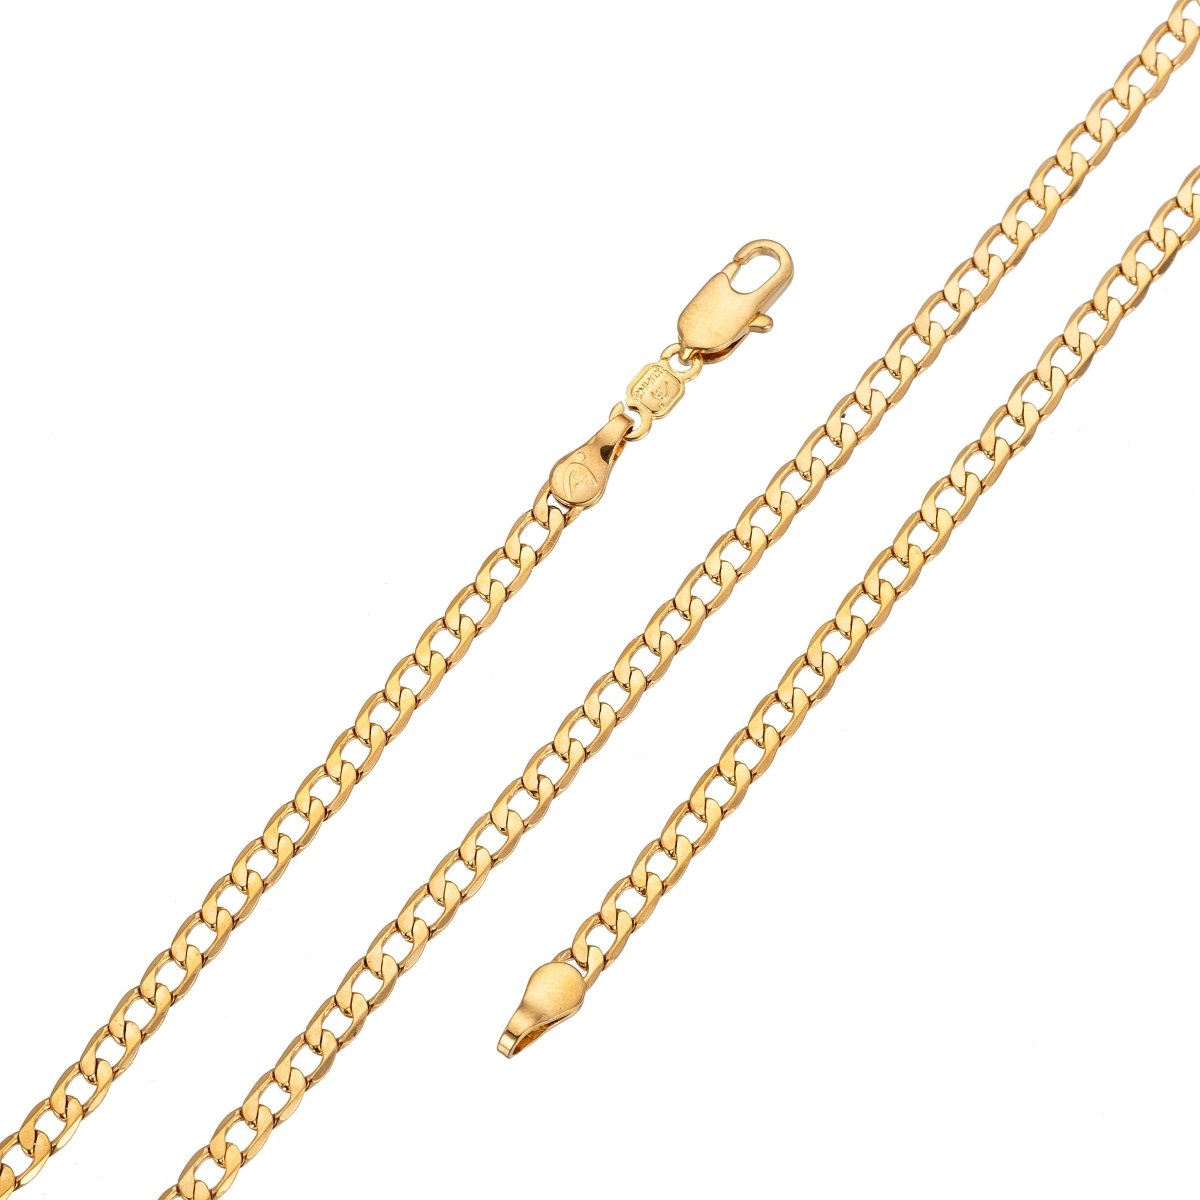 24K Gold Filled Curb Chain Necklace, 19.5 inch Finished Necklace For Jewelry Making, Dainty 2.6mm Curb Necklace w/ Lobster Clasps | CN-292 Clearance Pricing - DLUXCA